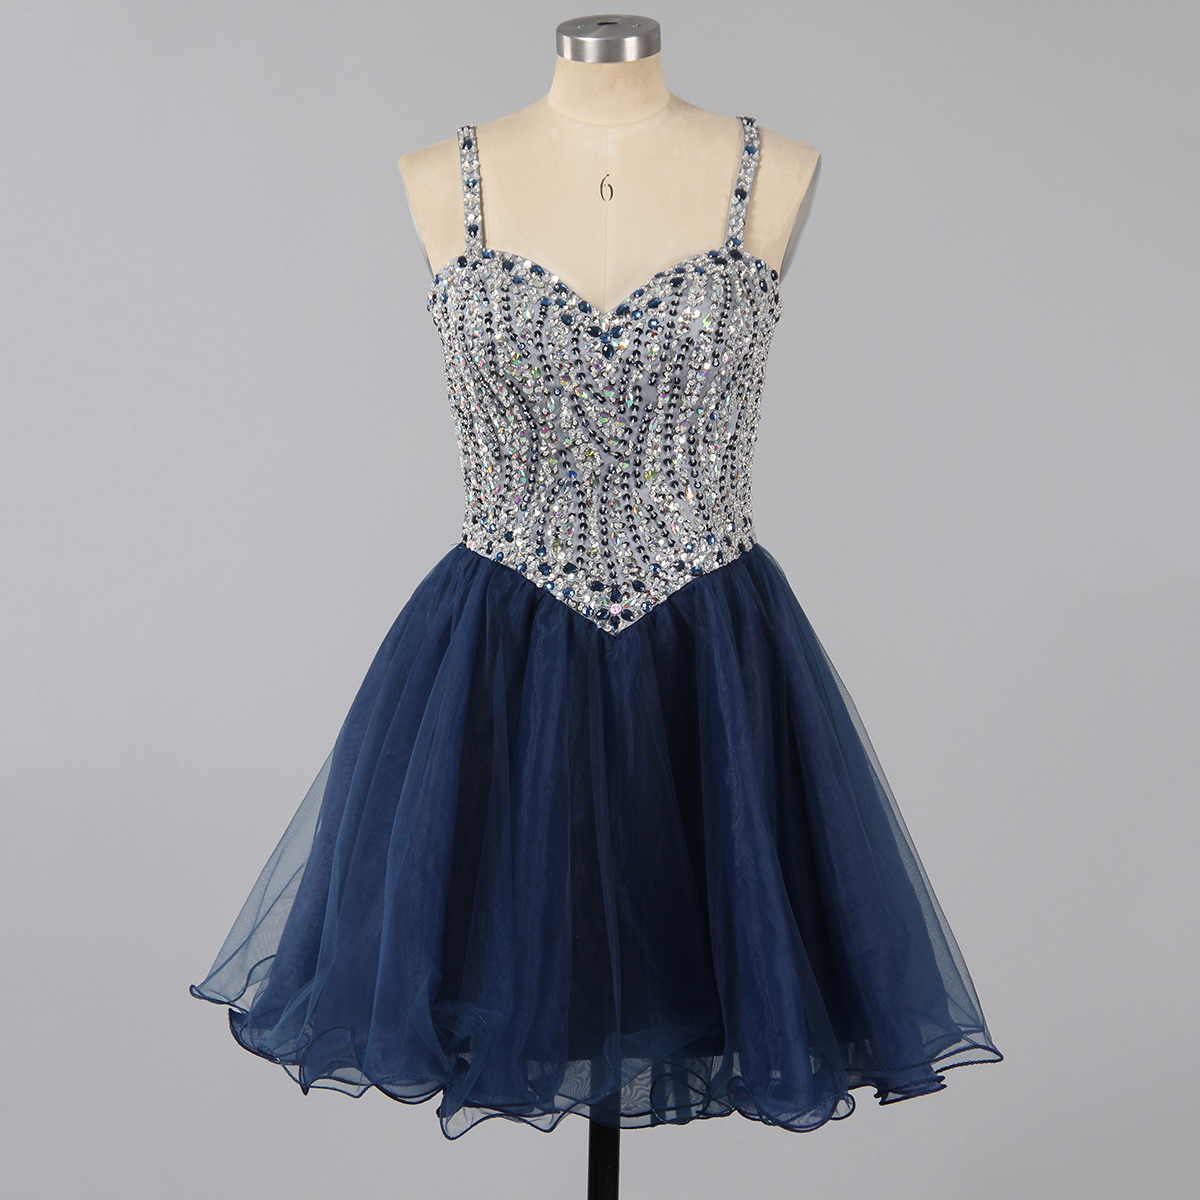 Sweetheart A-line Beaded Homecoming Dress In Navy Blue